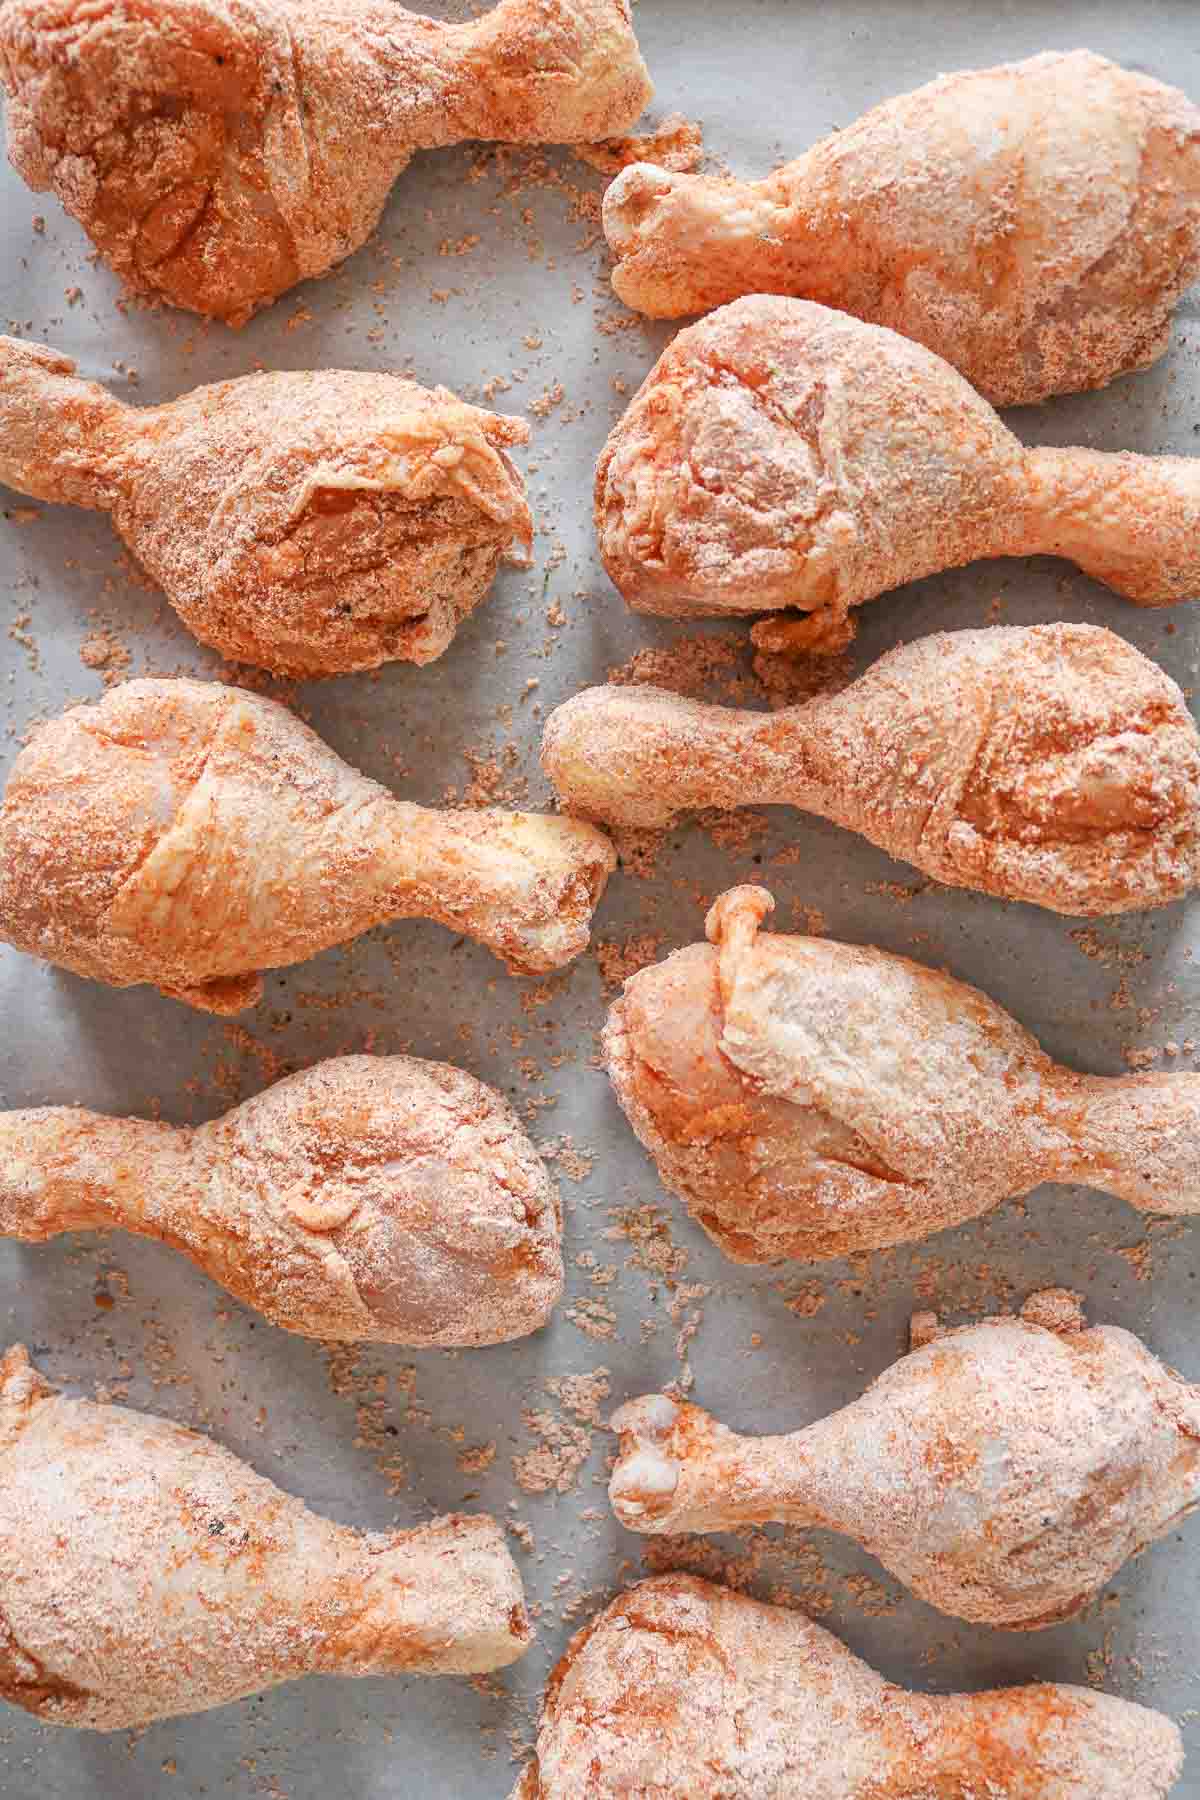 Seasoned chicken drumsticks on a parchment paper-lined sheet pan before cooking.